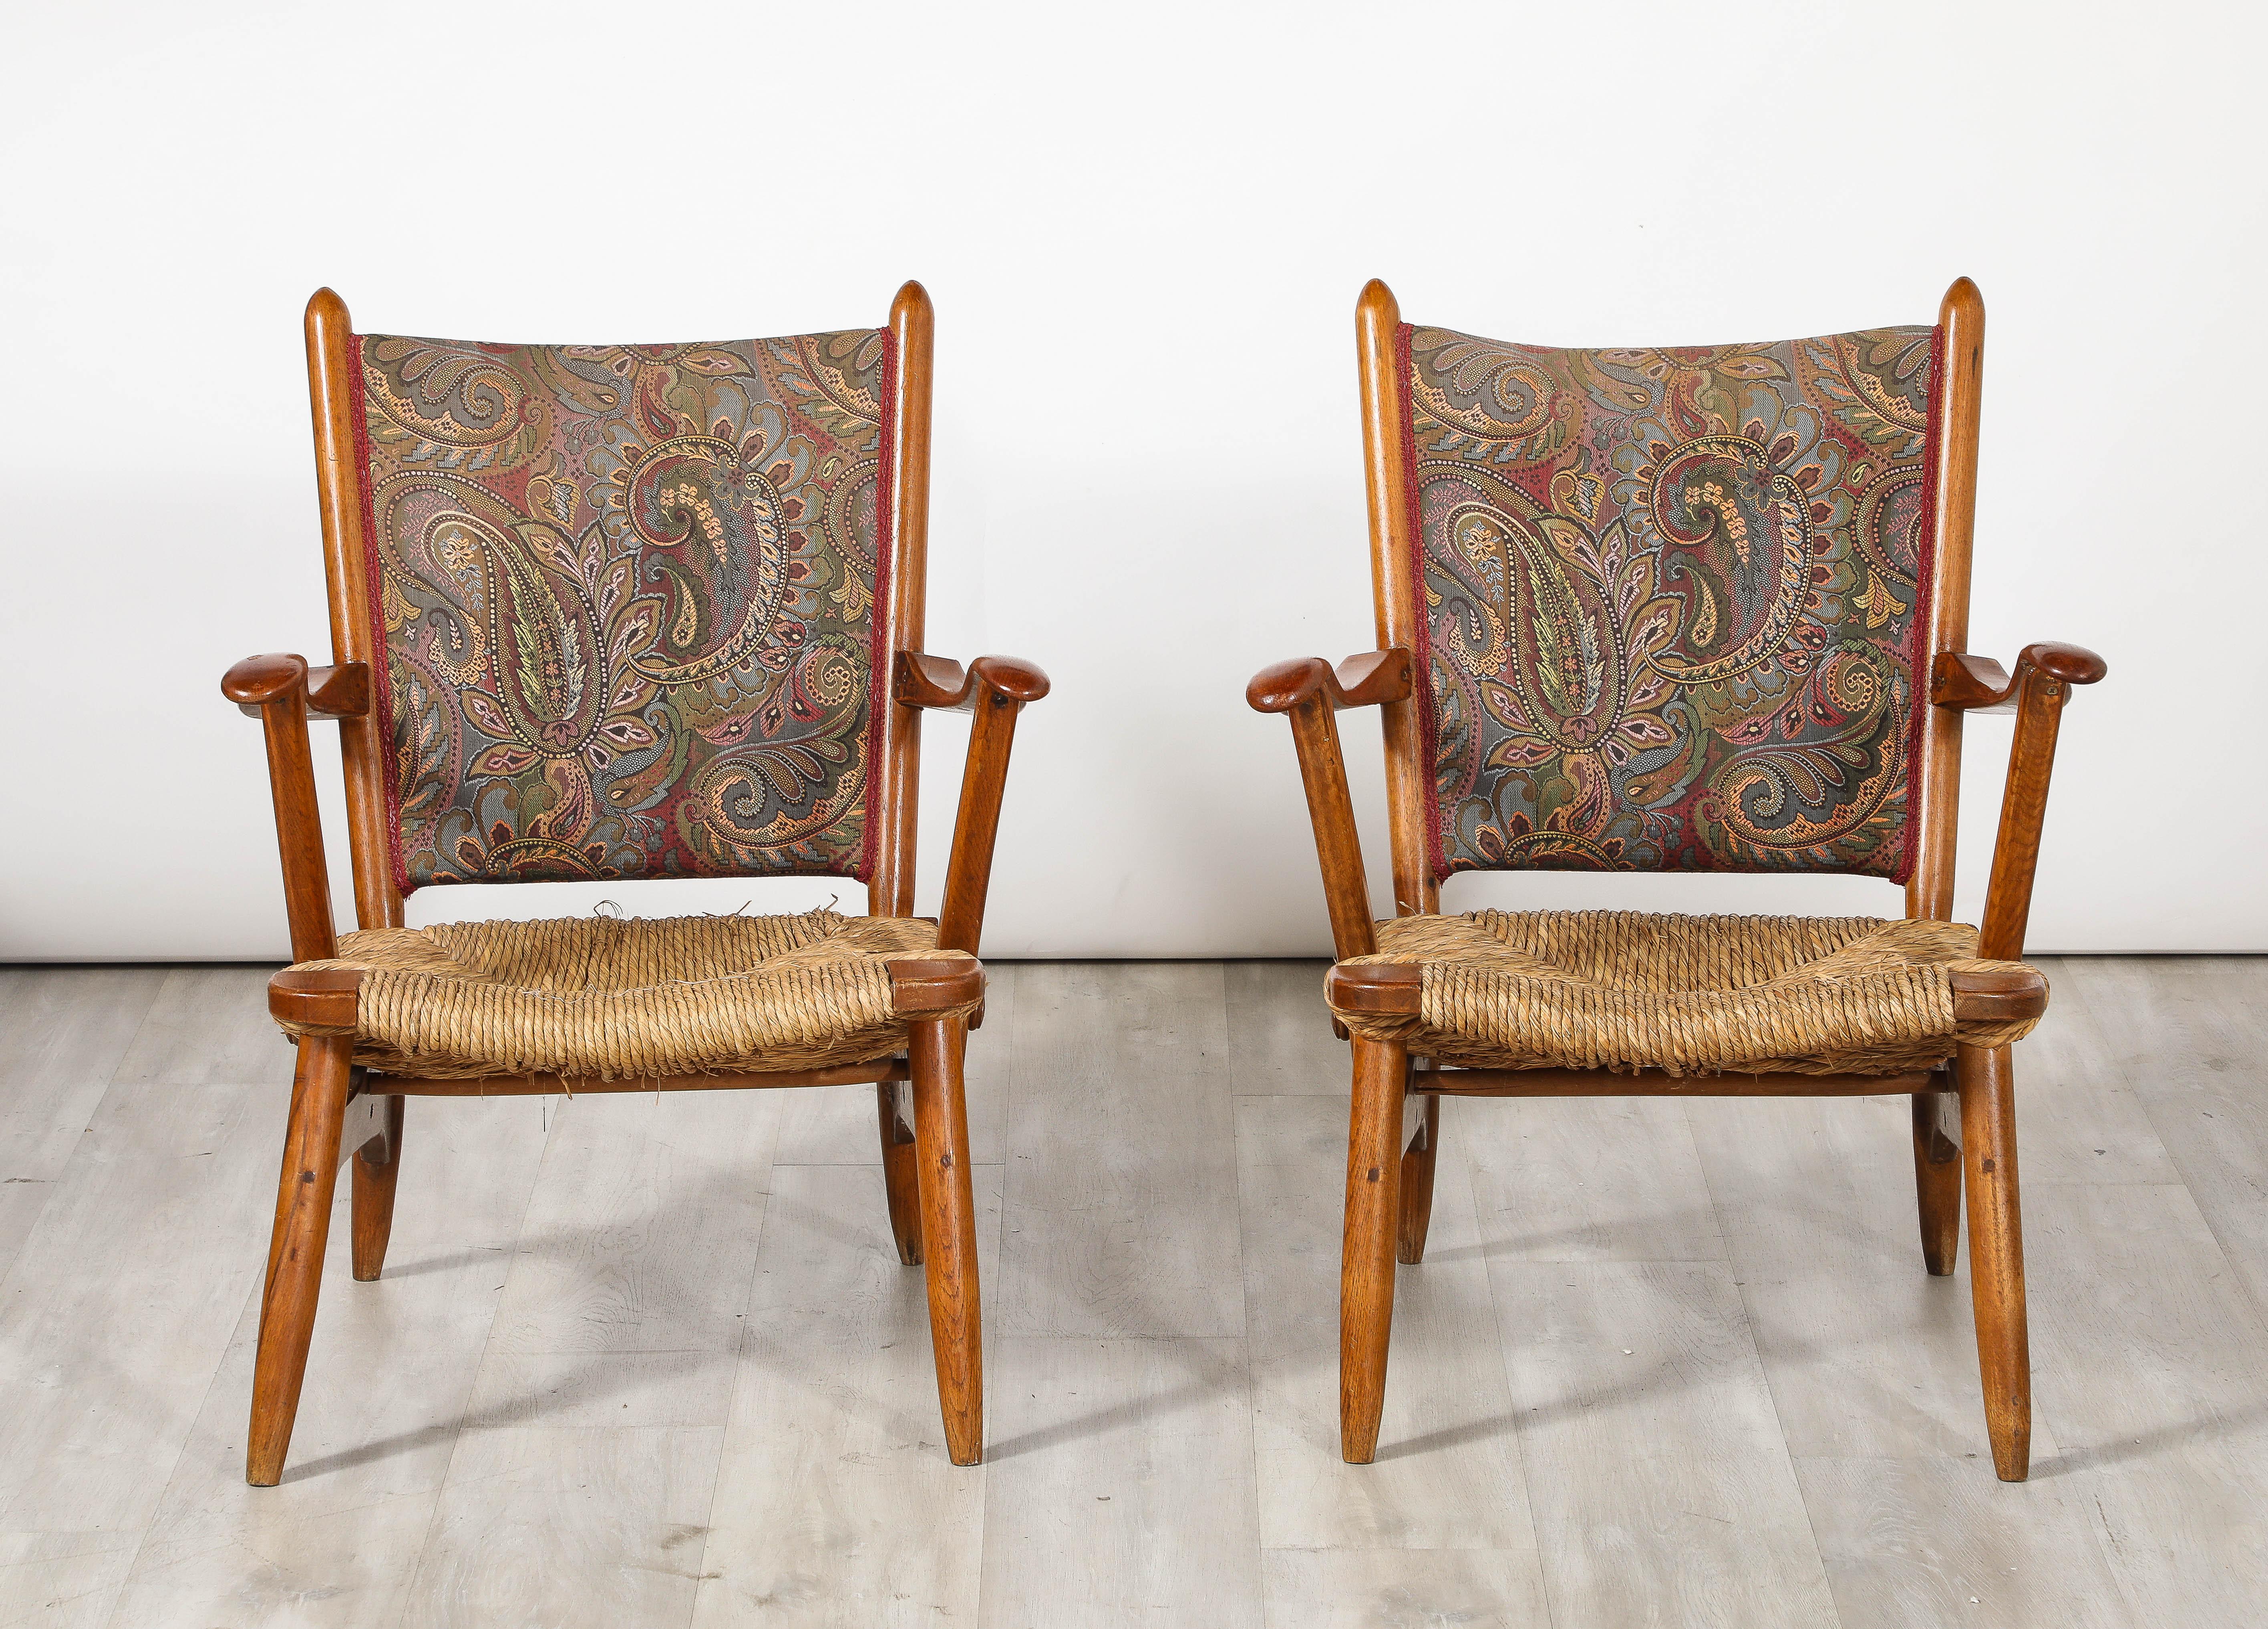 A pair of wonderfully organic Dutch armchairs in walnut with hand-woven rush seats and upholstered backs covered with a paisley design.  The form is greatly considered and perfectly executed, the carving is exceptionally sophisticated, making a